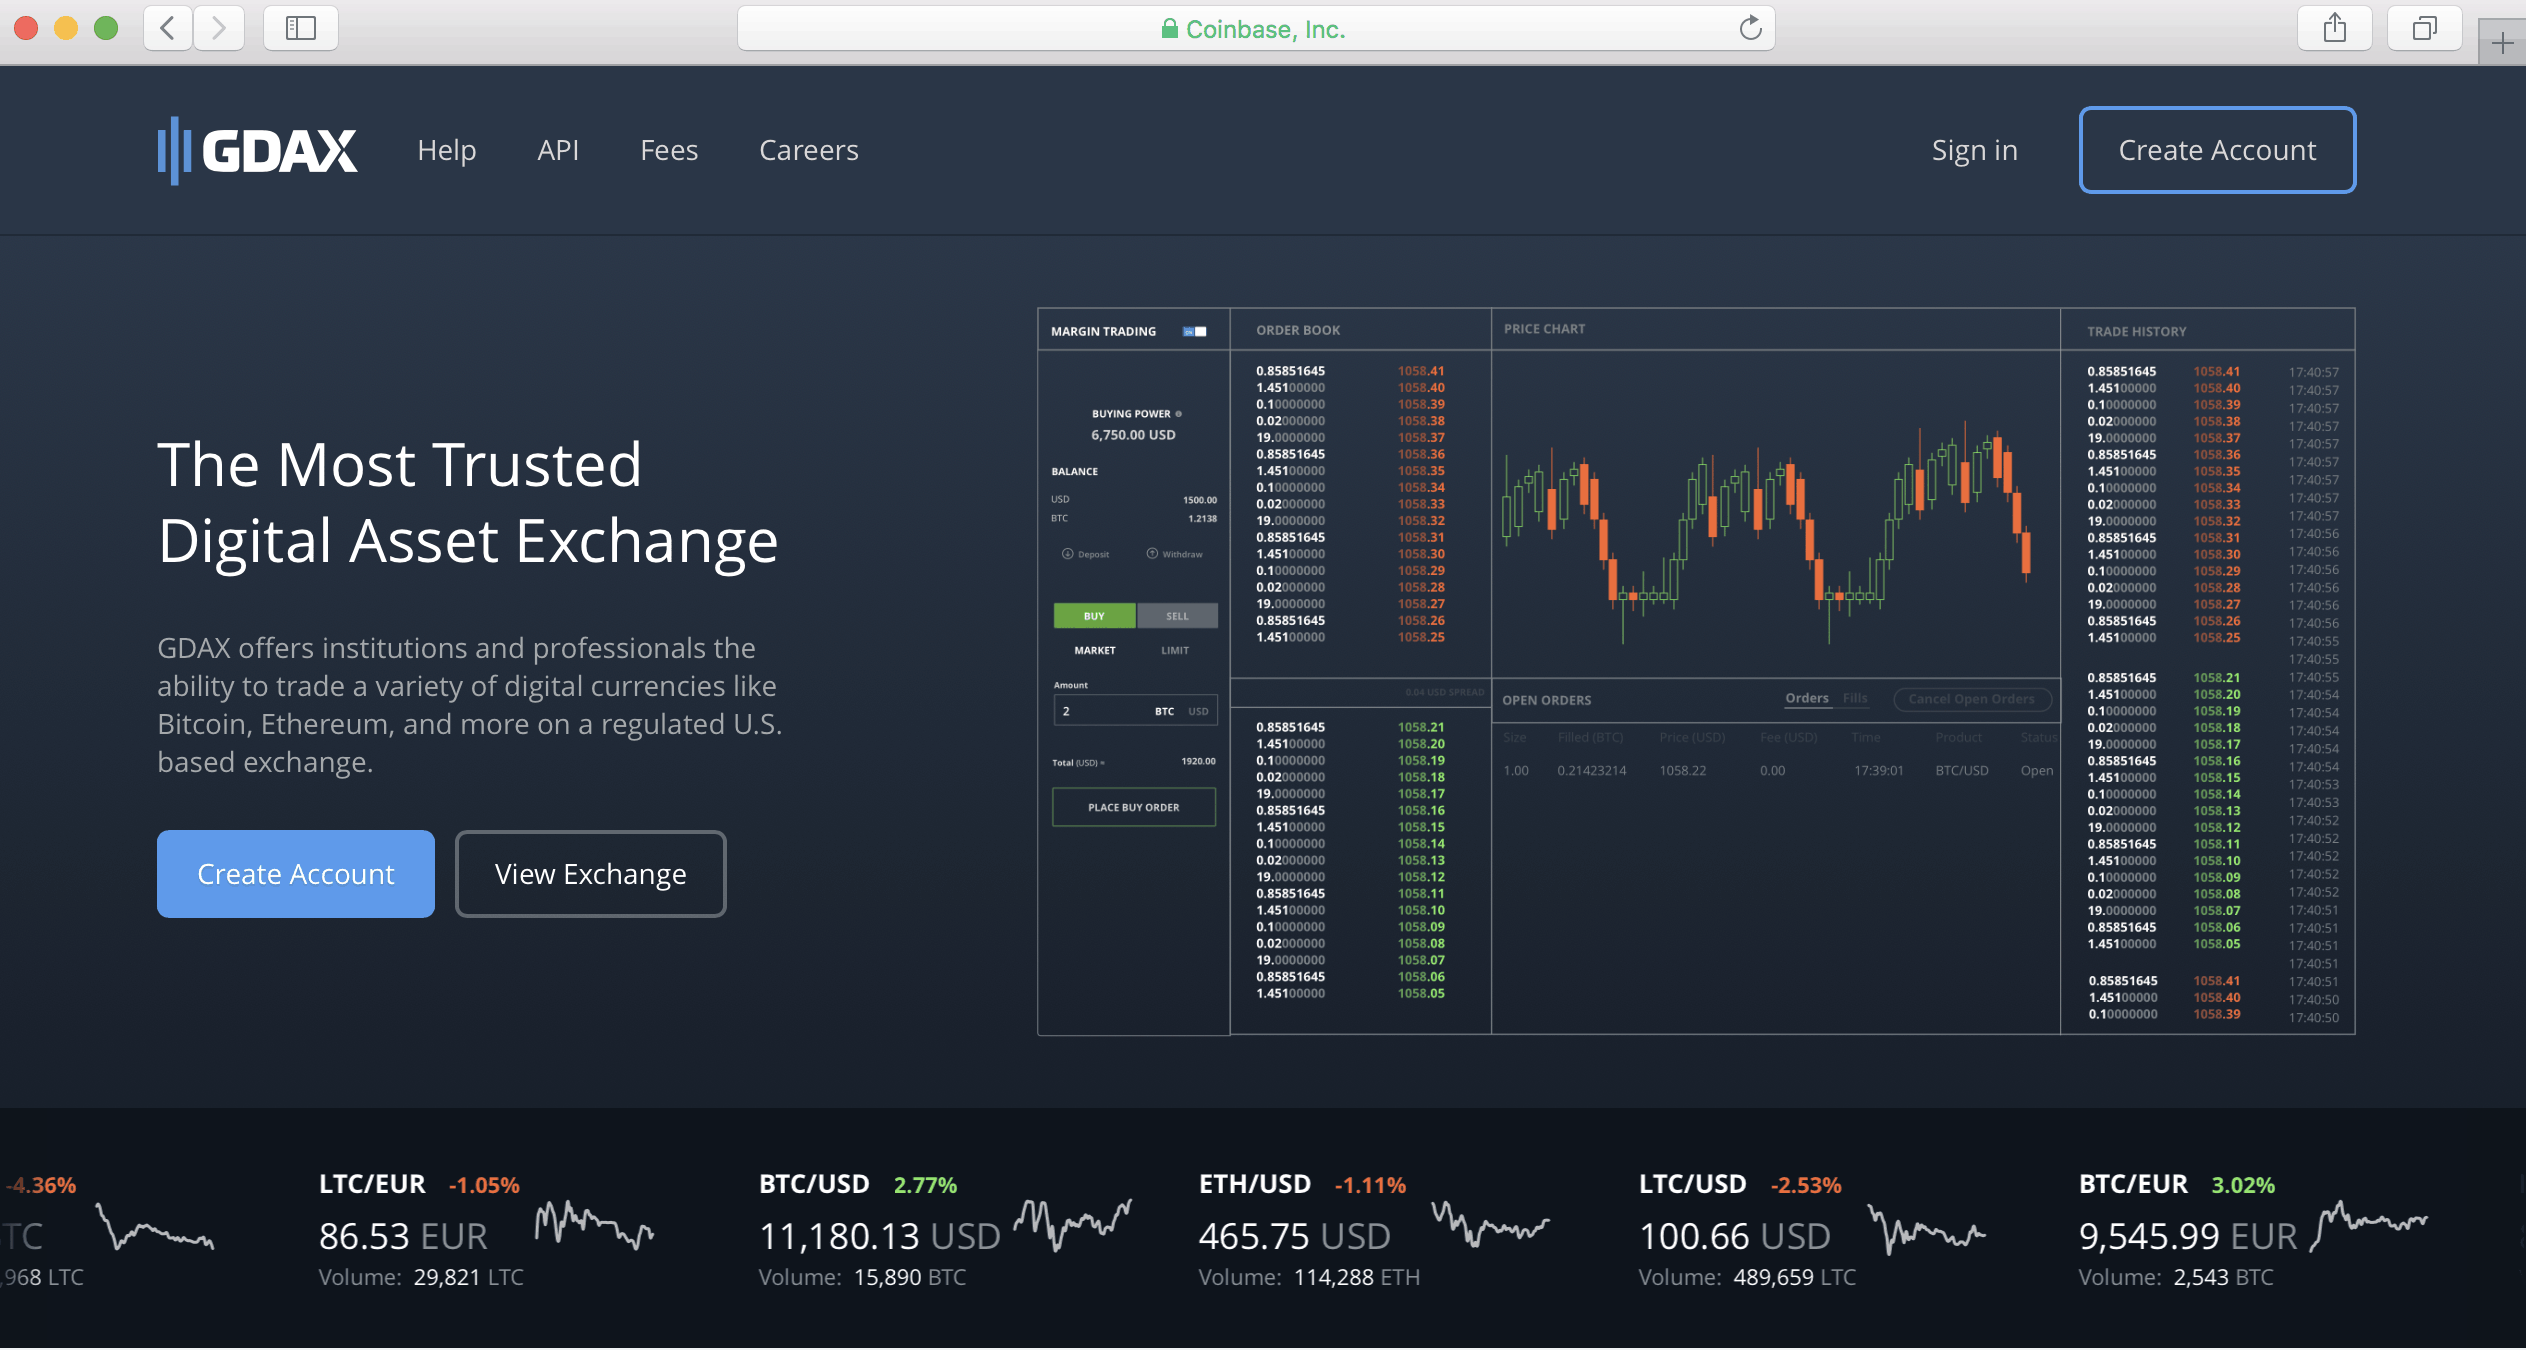 GDAX Home Page Image